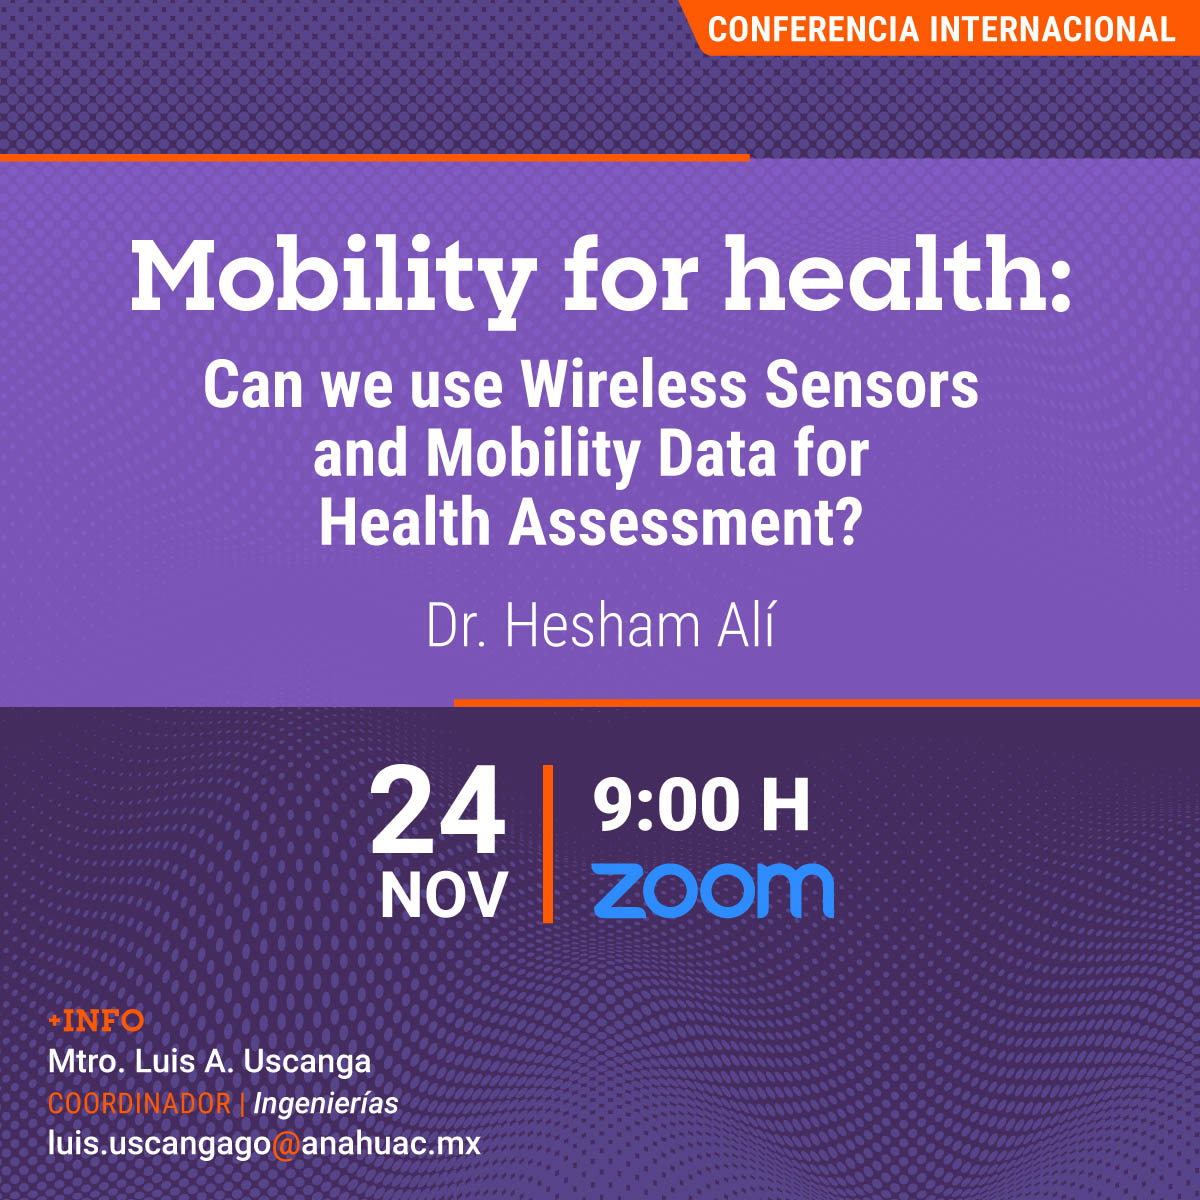 Mobility for Heath: Can we use Wireless Sensors and Mobility Data for Health Assessment?